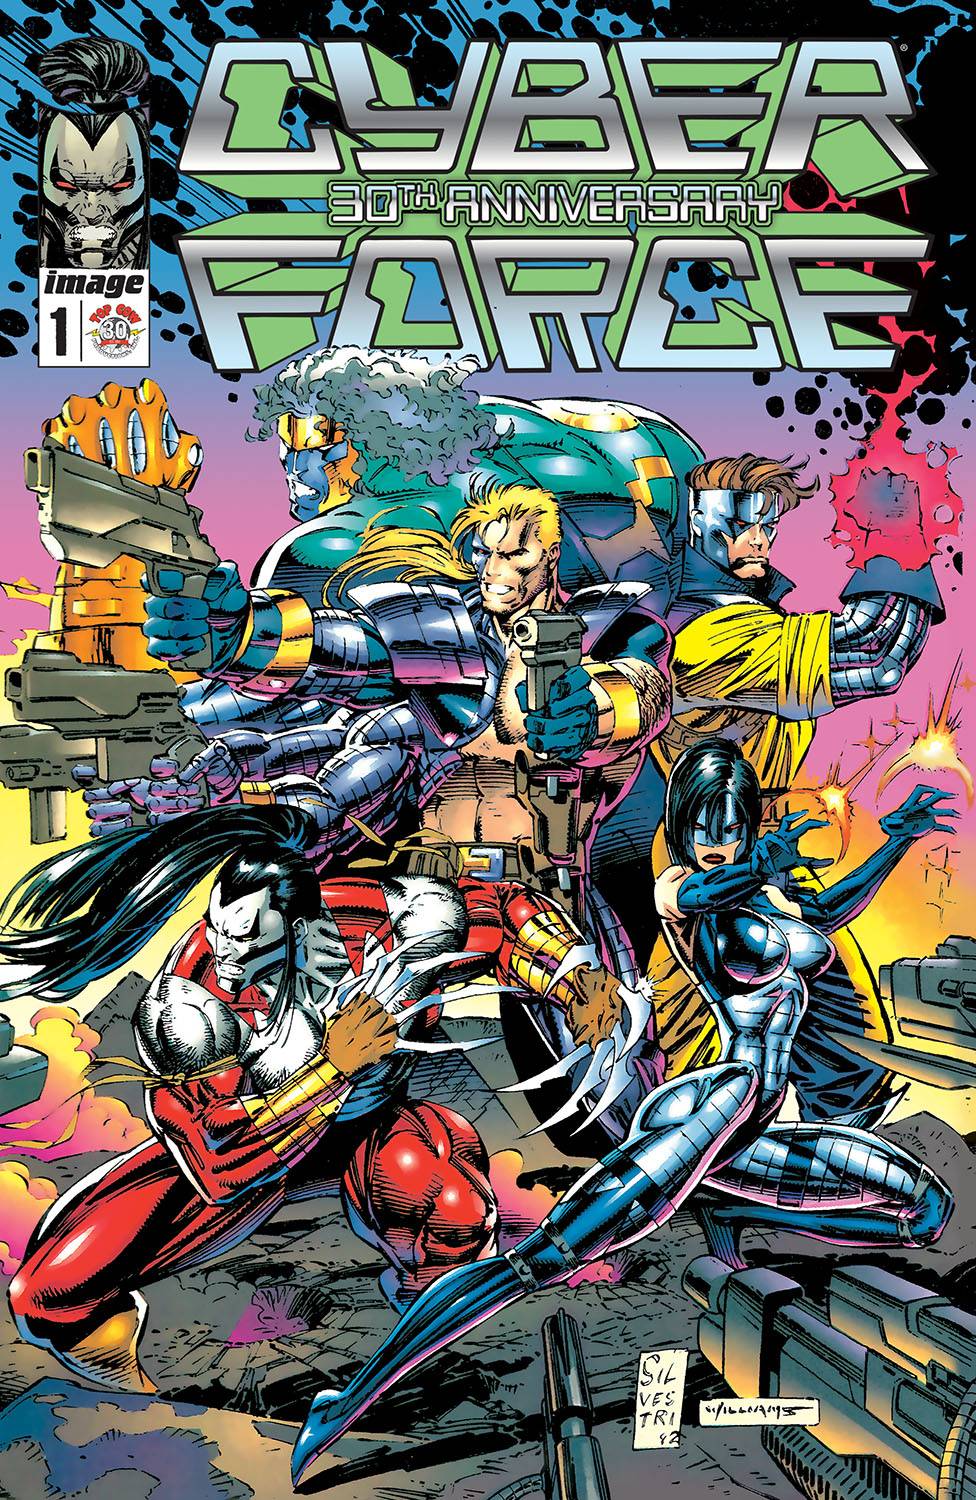 CYBERFORCE #1 30TH ANNIVERSARY EDITION